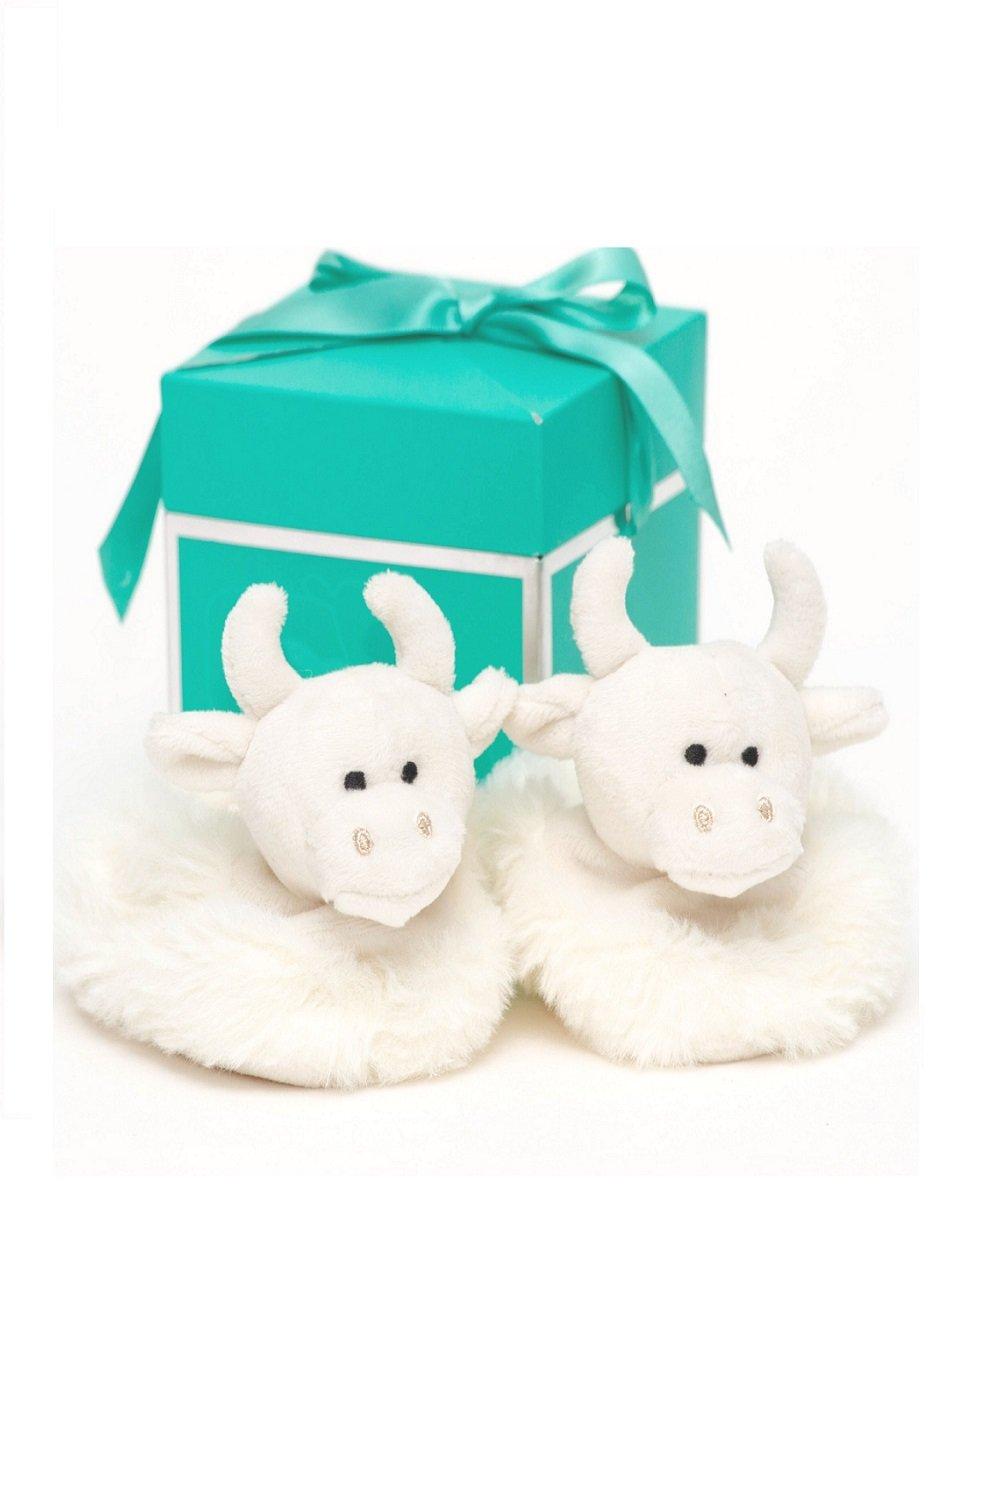 Highland Coo Baby Slippers Cream 0-6 months